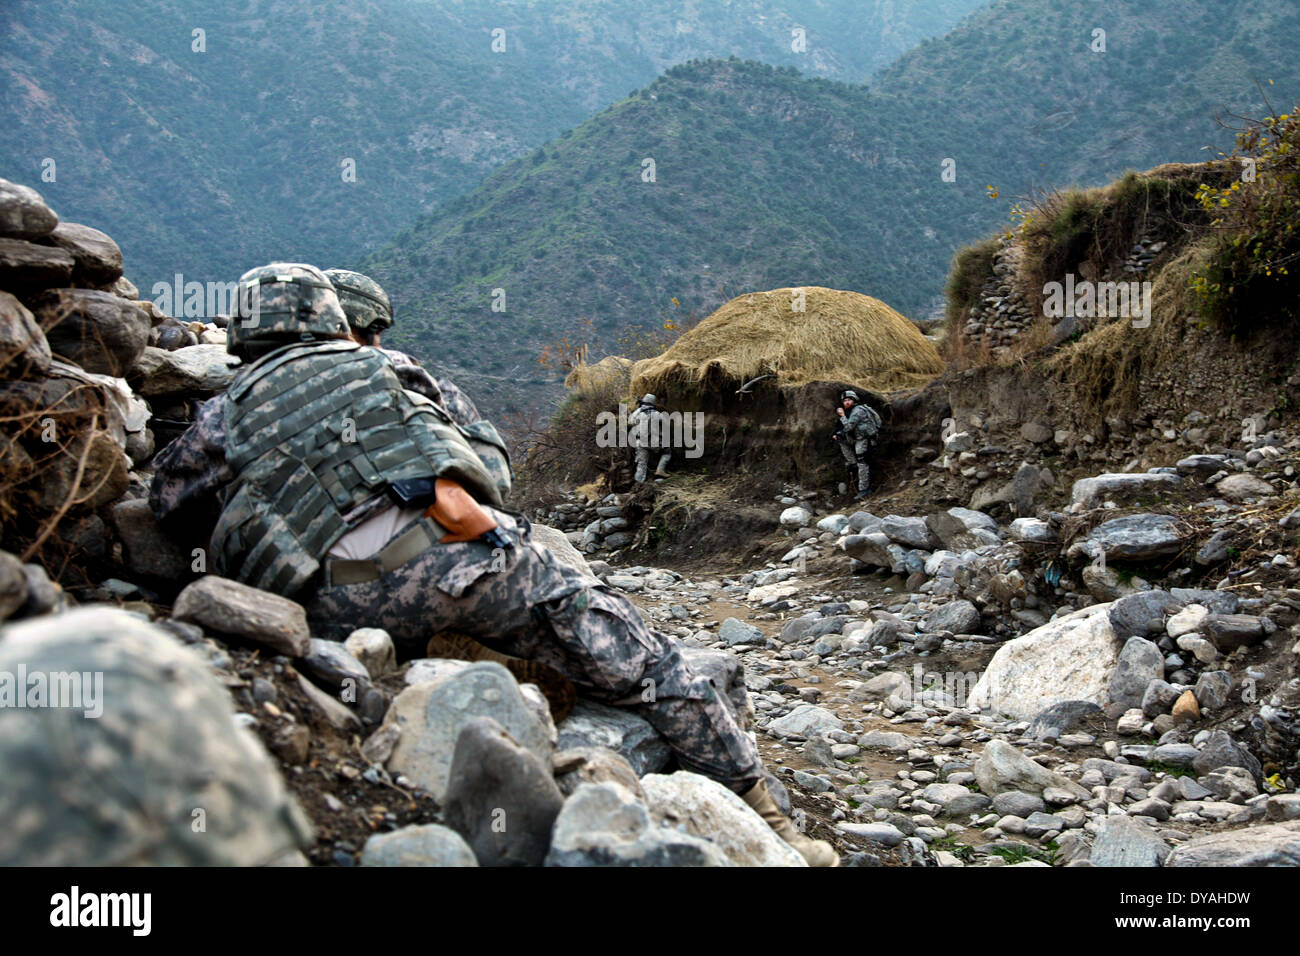 US Army soldiers with the Kunar Provincial Reconstruction Team, take cover during an ambush by Taliban insurgents after holding a shura, or meeting December 7, 2009 in Lachey village, Shigal district, Kunar province, Afghanistan. Stock Photo